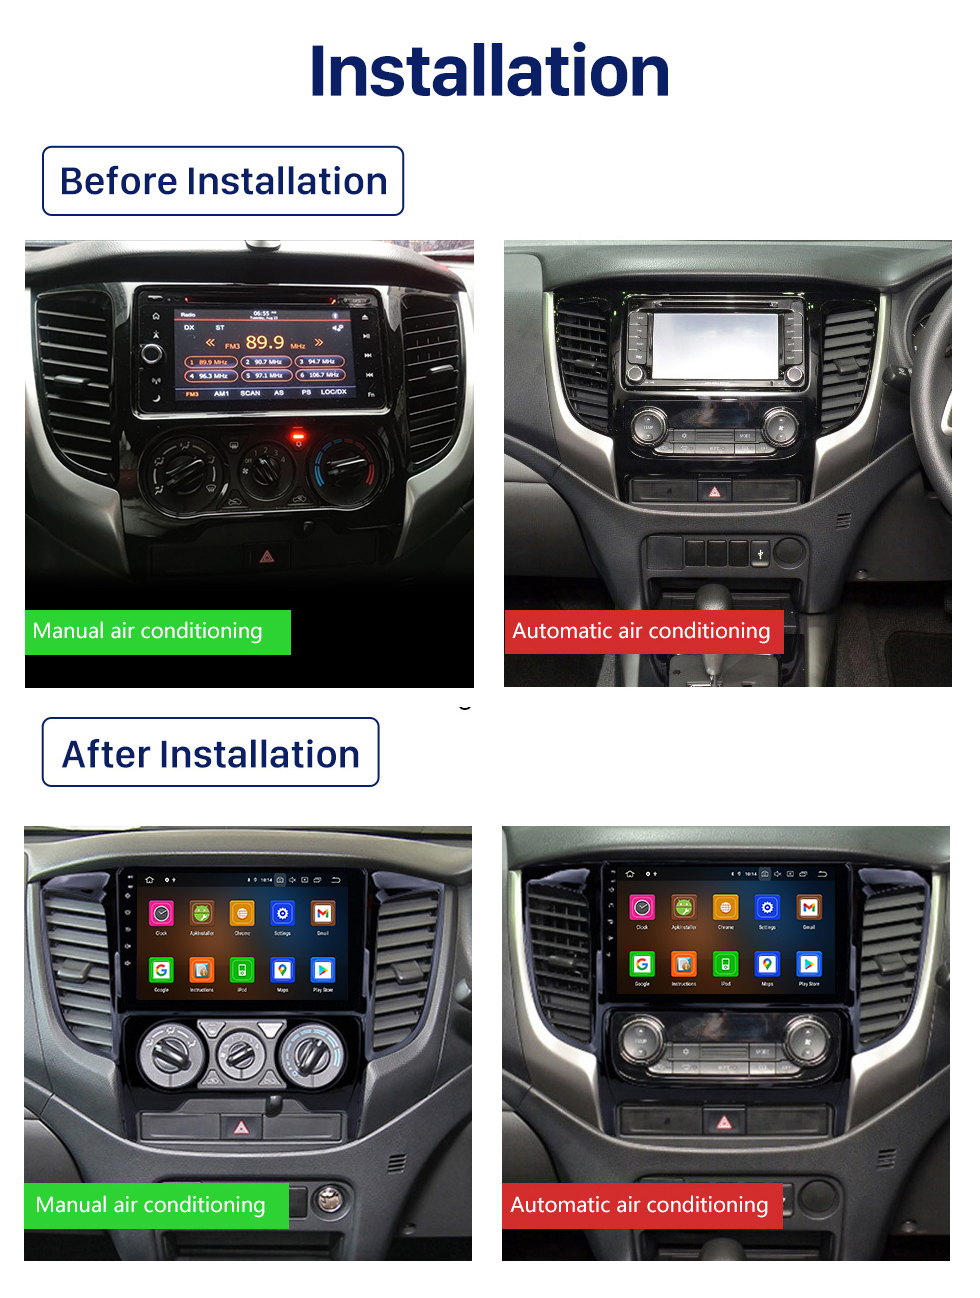 Seicane 9 inch Android 10.0 2015 Mitsubishi TRITON Manual A/C 1024*600 Touchscreen Radio with GPS Navi USB FM Bluetooth WIFI support RDS Carplay 4G DVD Player